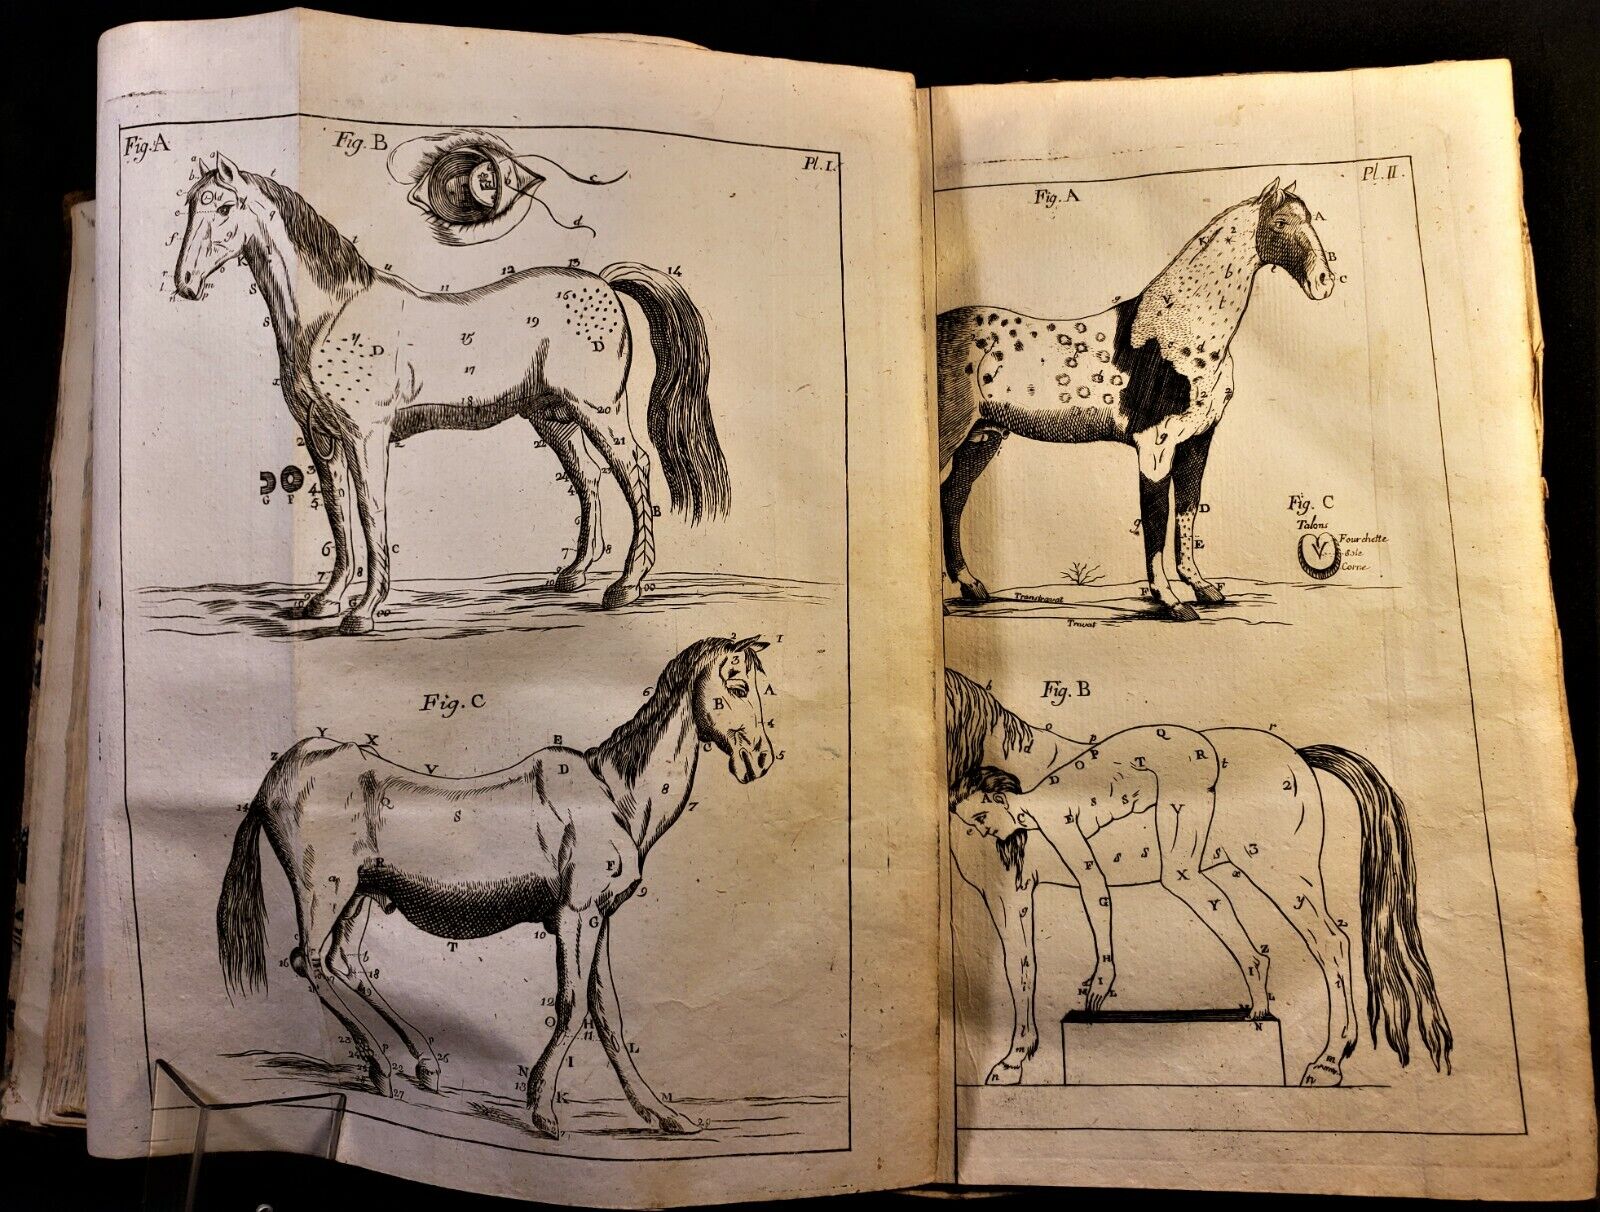 1771 THE NEW PERFECT MARSHAL BY GARSAULT - Horse Diseases, Cure and Equestrian